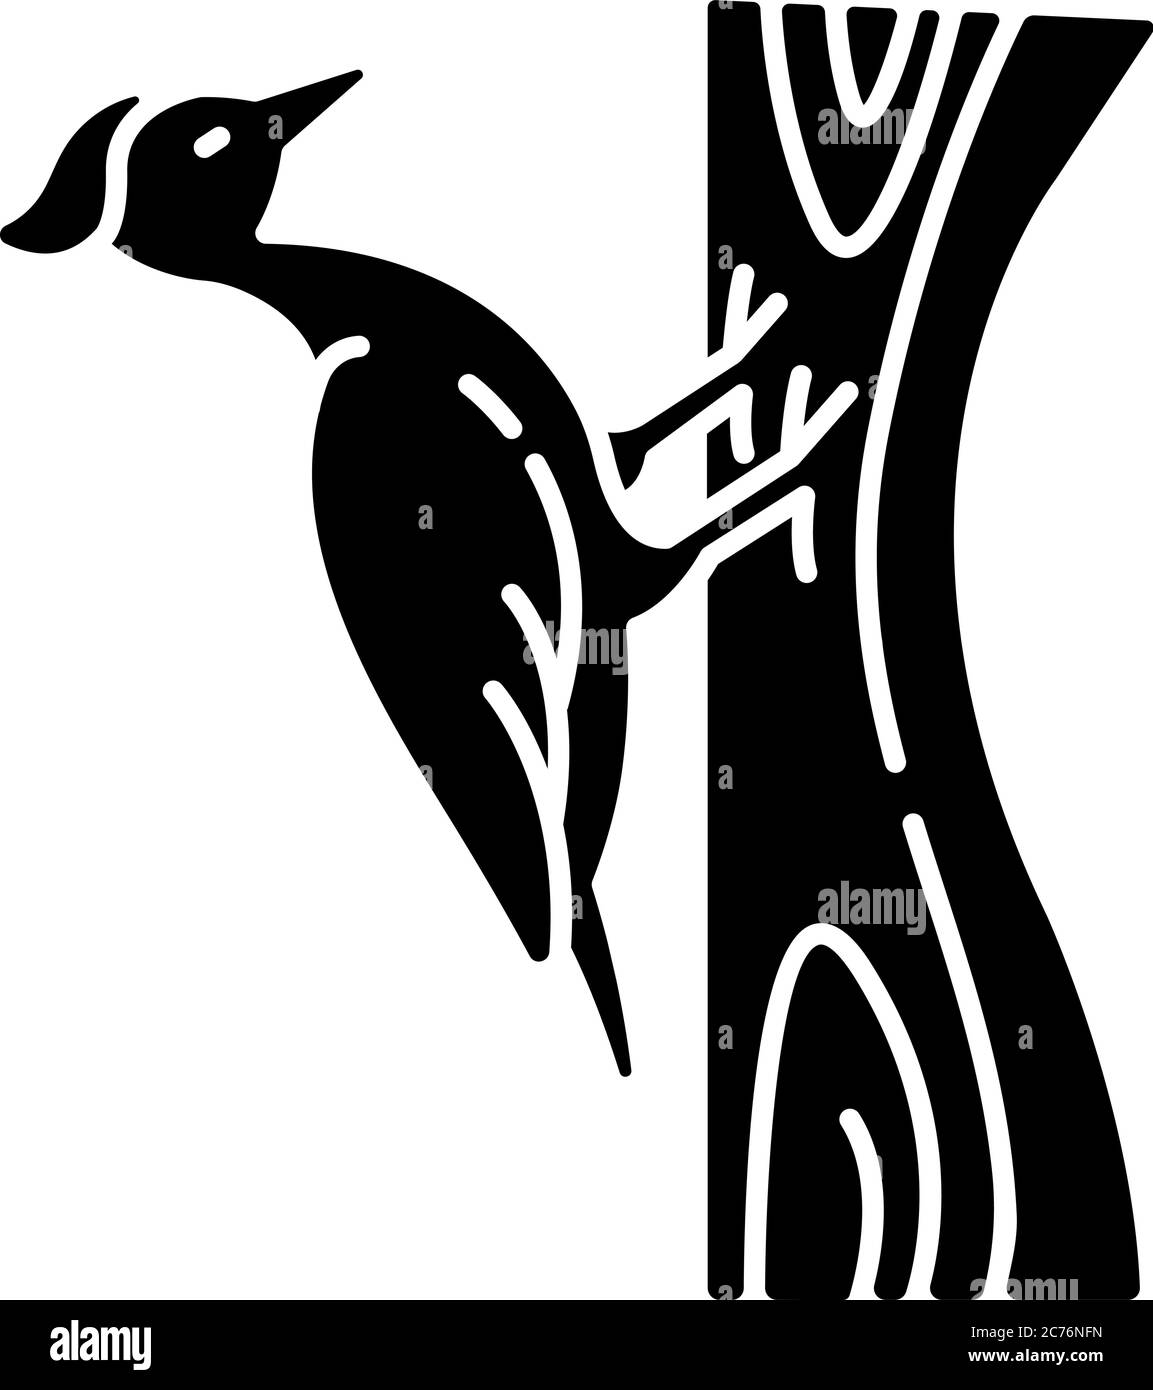 Woodpecker black glyph icon. Common bird, forest inhabitant, flying woodland creature. Zoology, ornithology silhouette symbol on white space. Pecker s Stock Vector